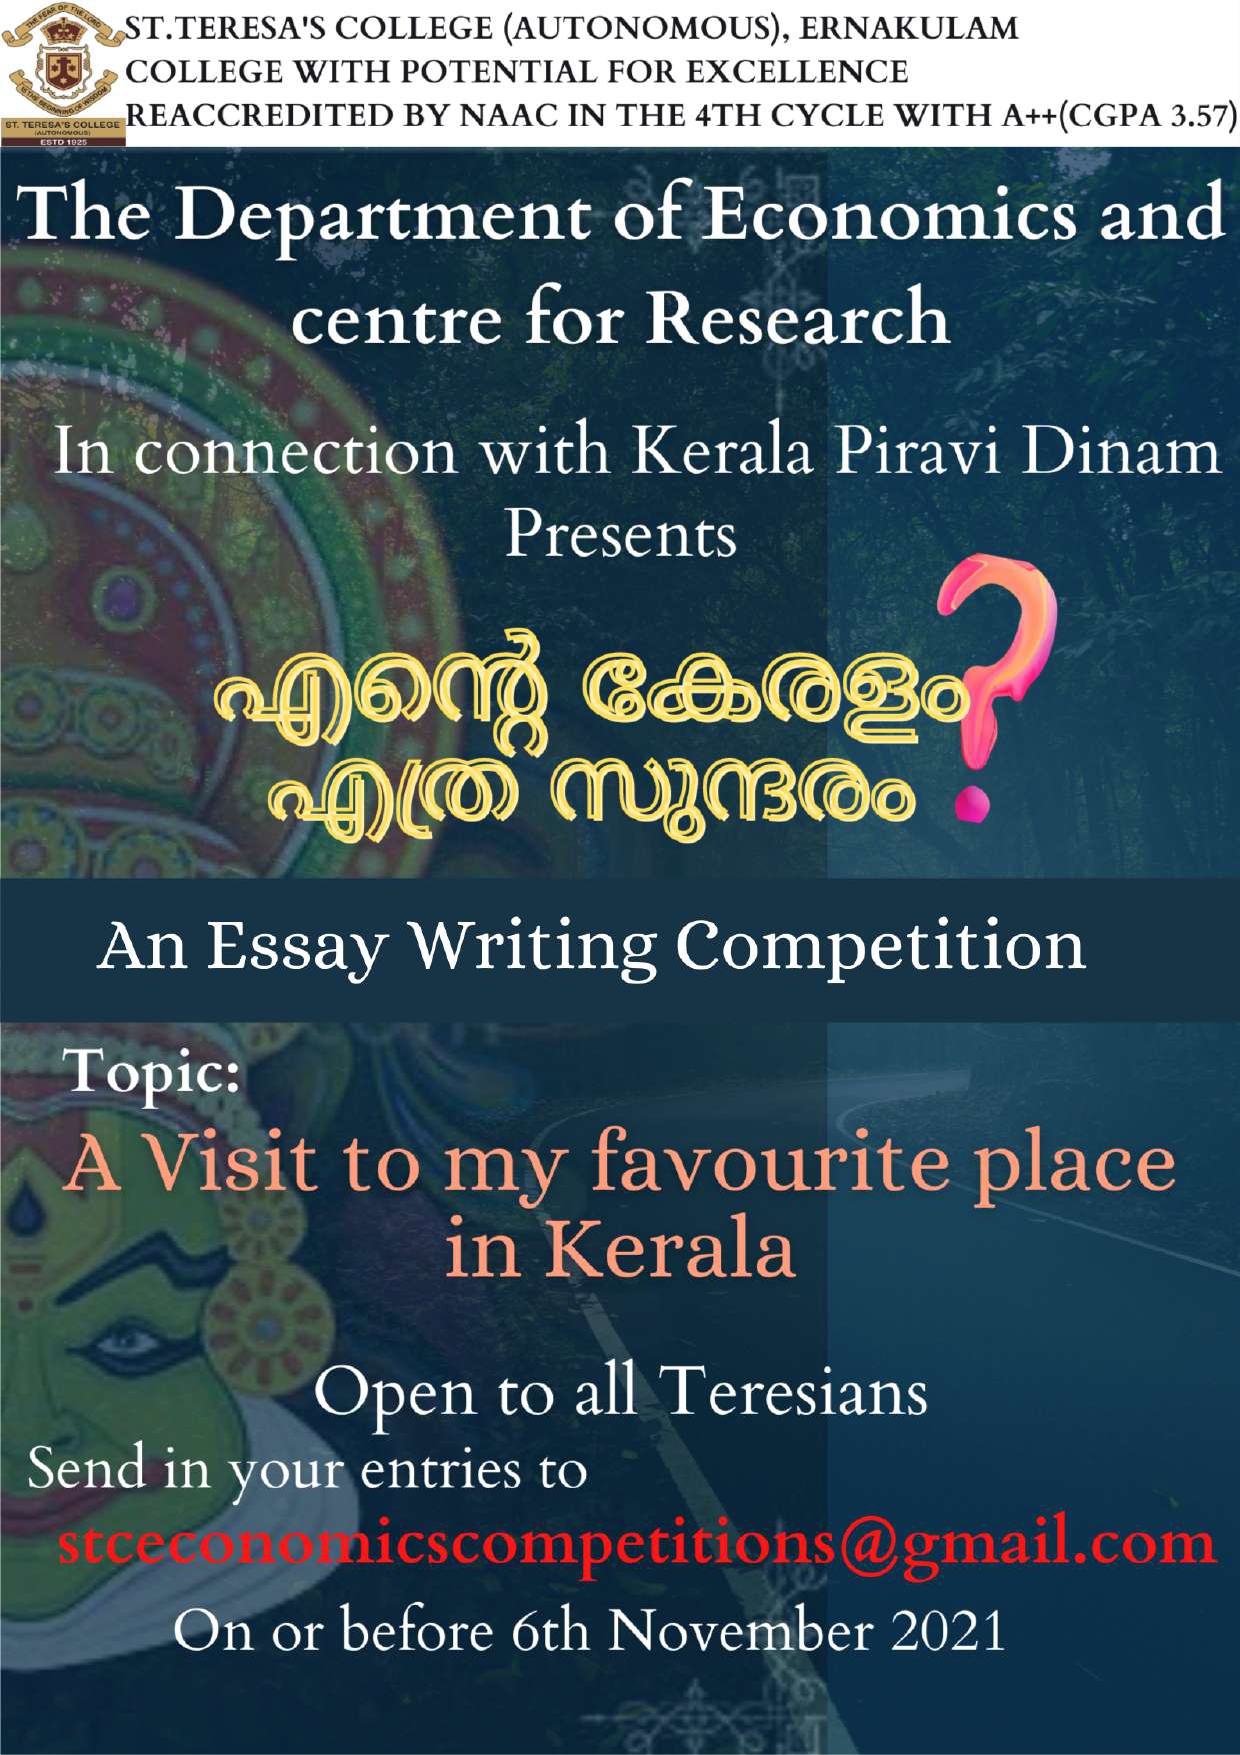 paper presentation competition in kerala